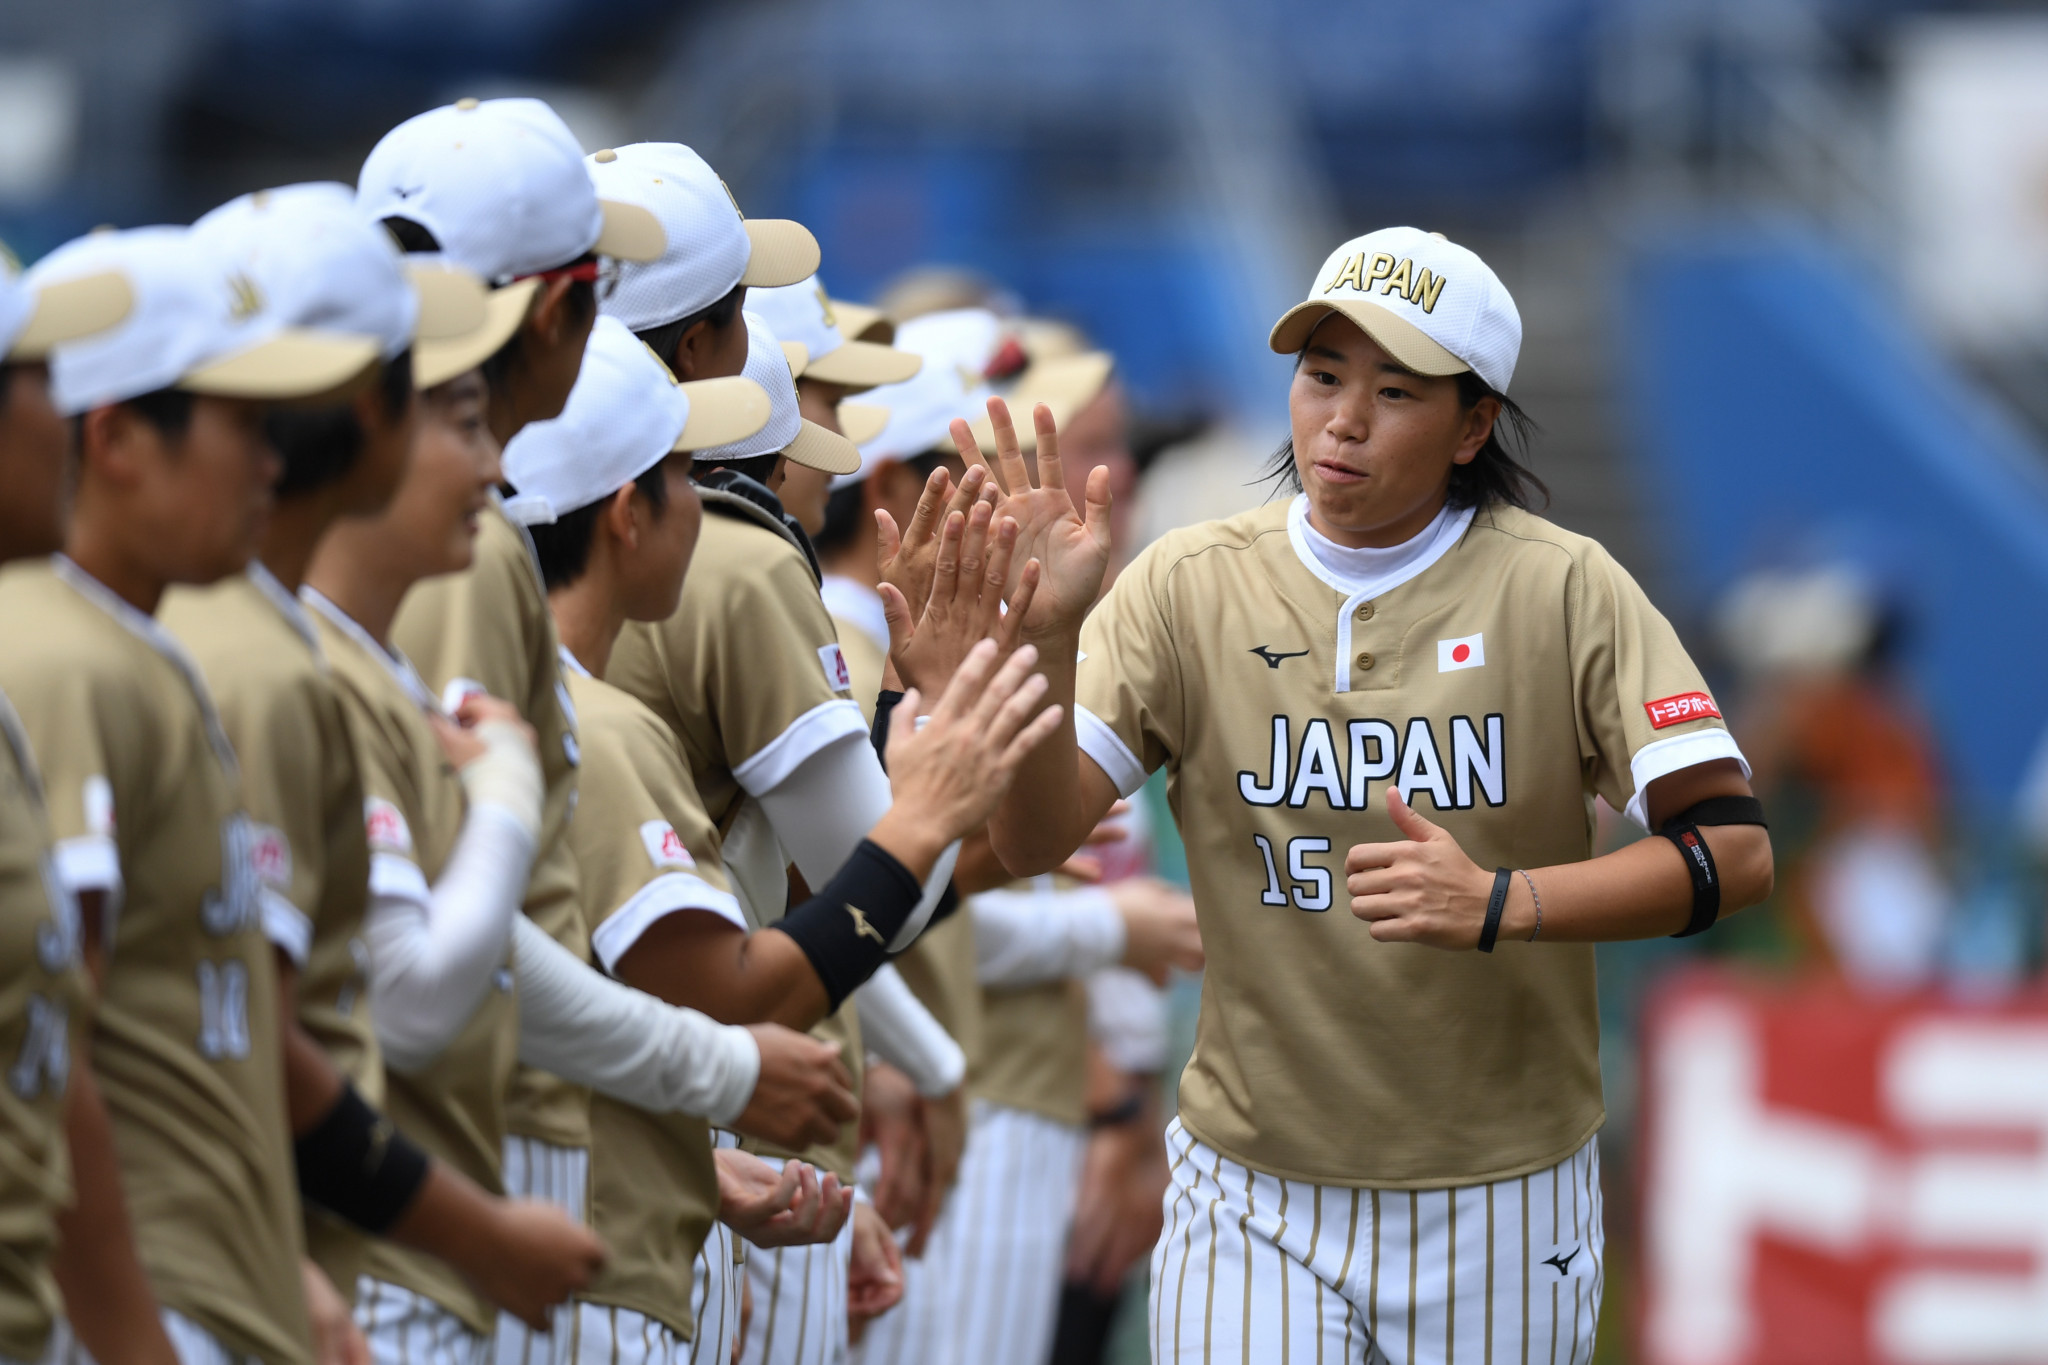 The JOC hope many of the additional Olympic medals they hope to win in 2020 will come from the new sports set to feature in Tokyo, including baseball and softball ©Getty Images